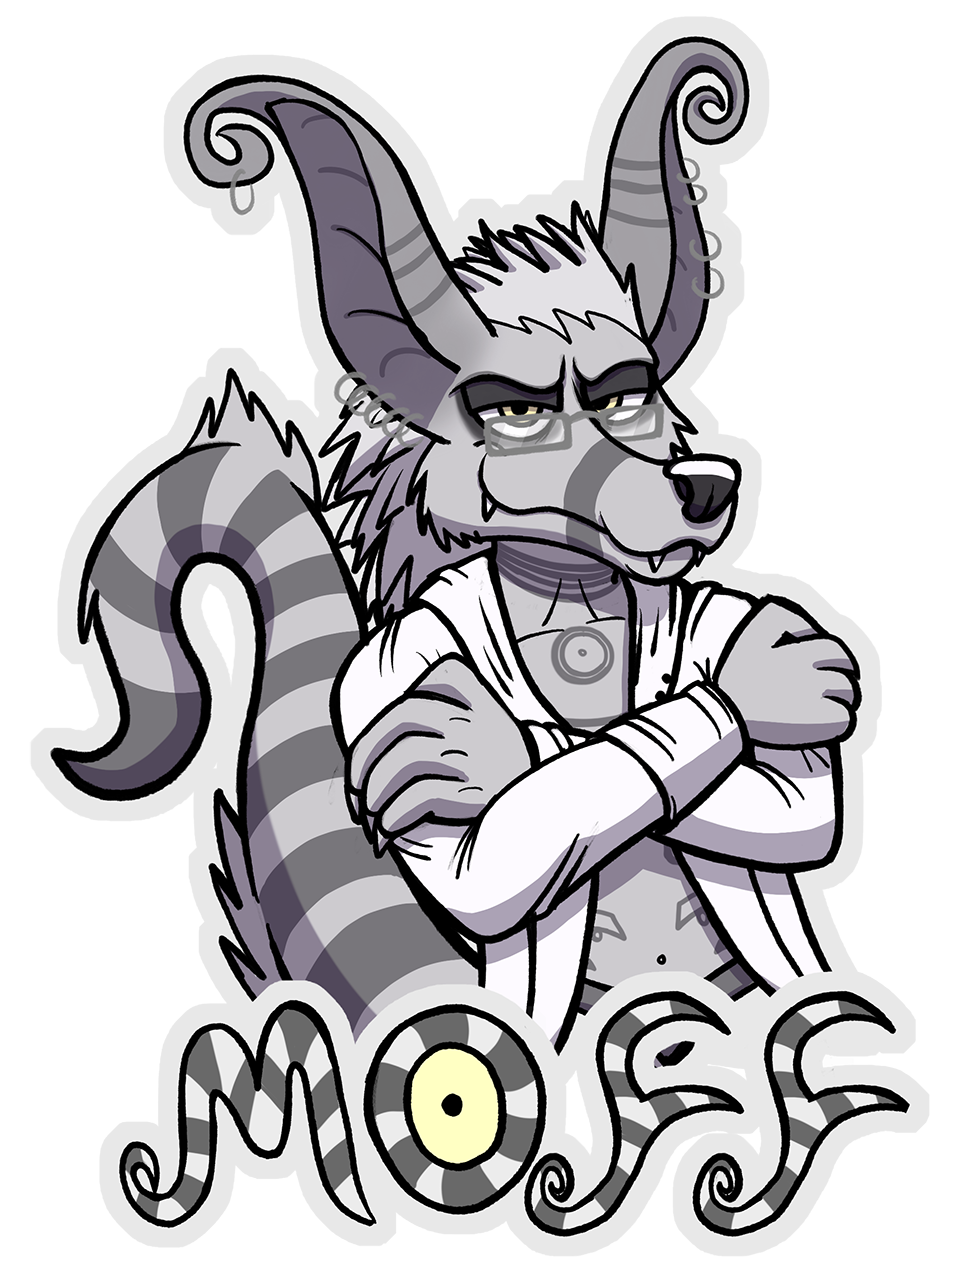 Commission - BLFC badge for MoffMepht